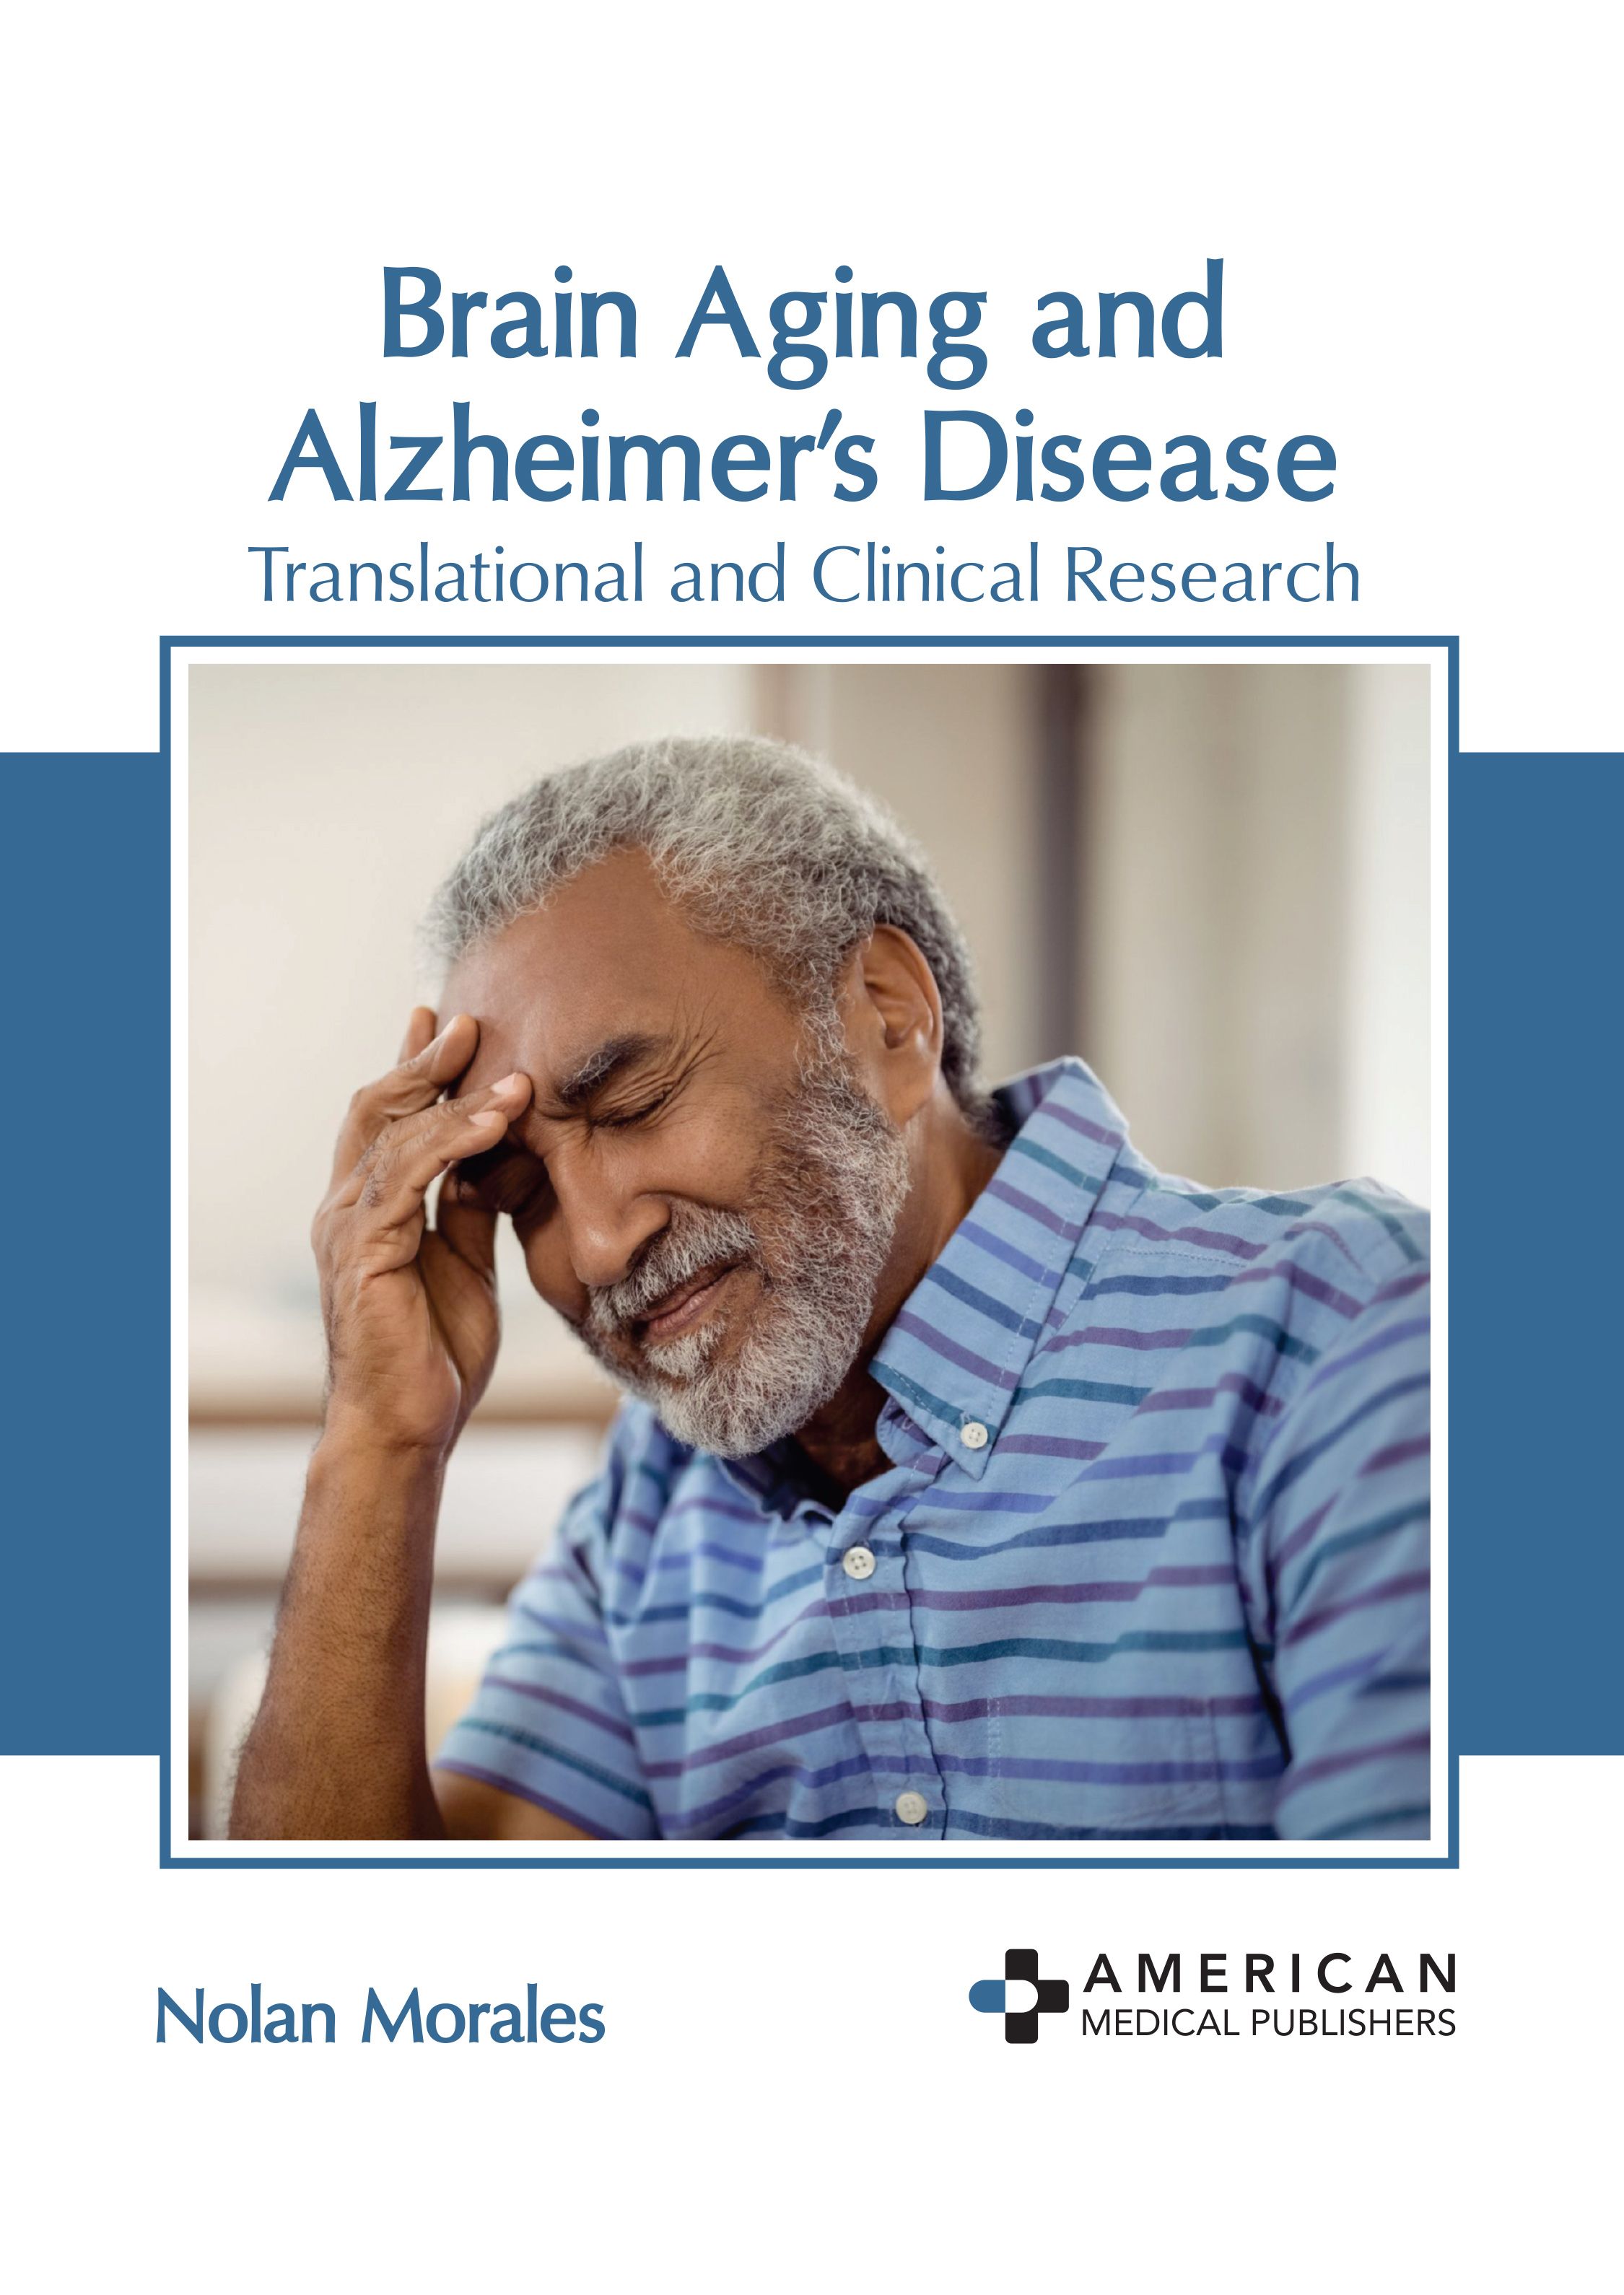 

exclusive-publishers/american-medical-publishers/brain-aging-and-alzheimer-s-disease-translational-and-clinical-research-9781639279425